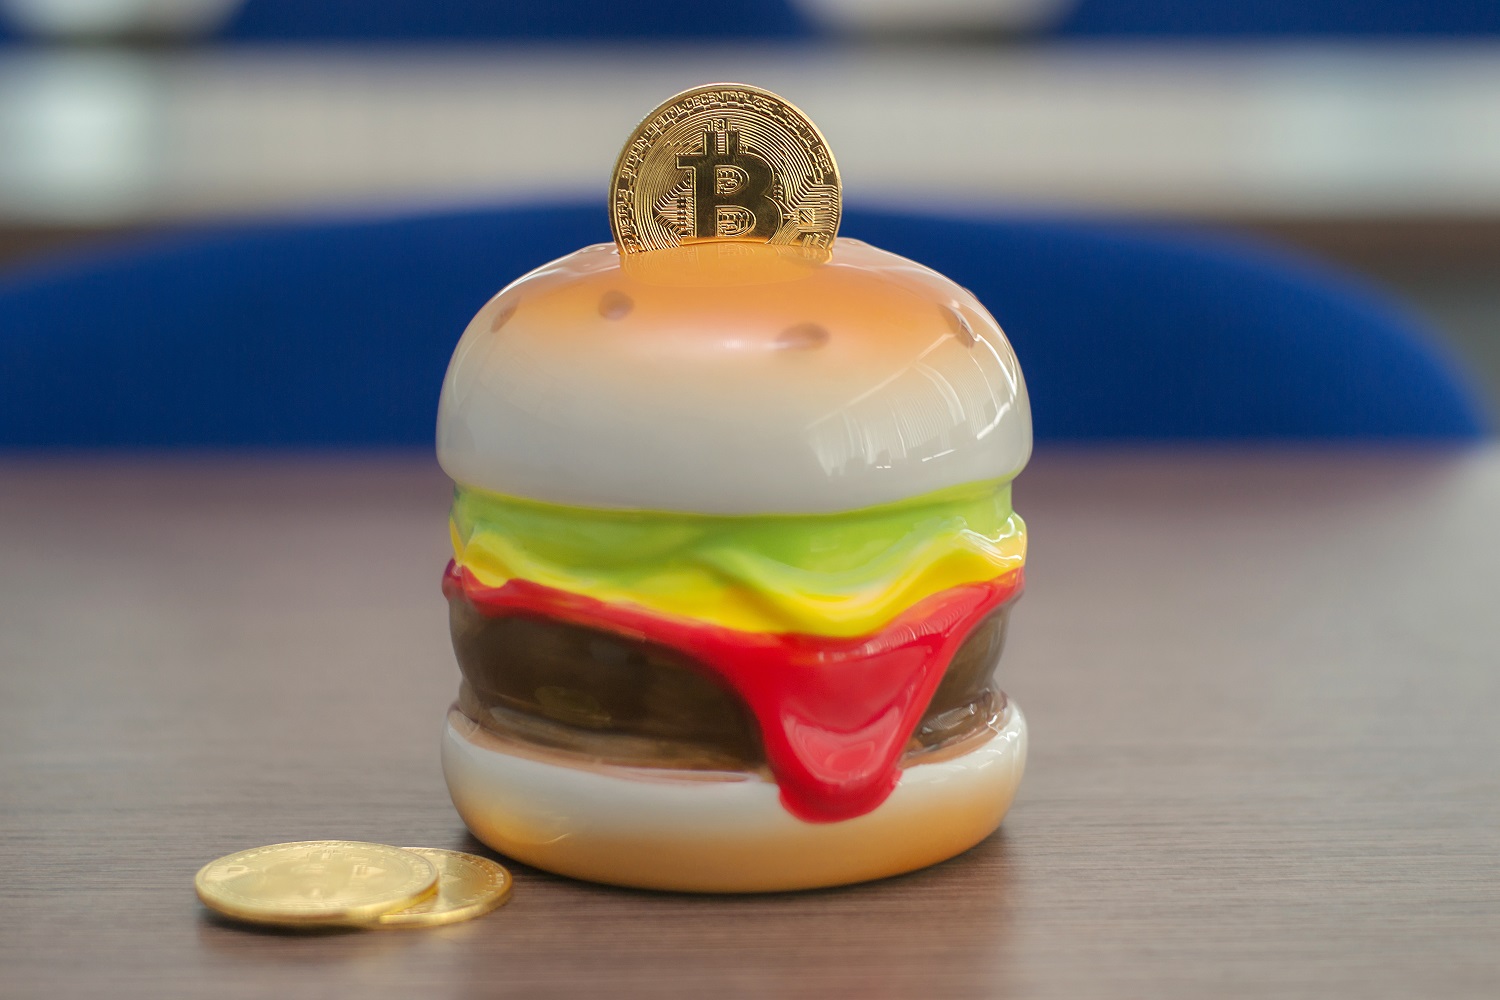 A metal coin intended to represent Bitcoin in the slot of a piggy bank made to look like a burger on a table next to other metal tokens.